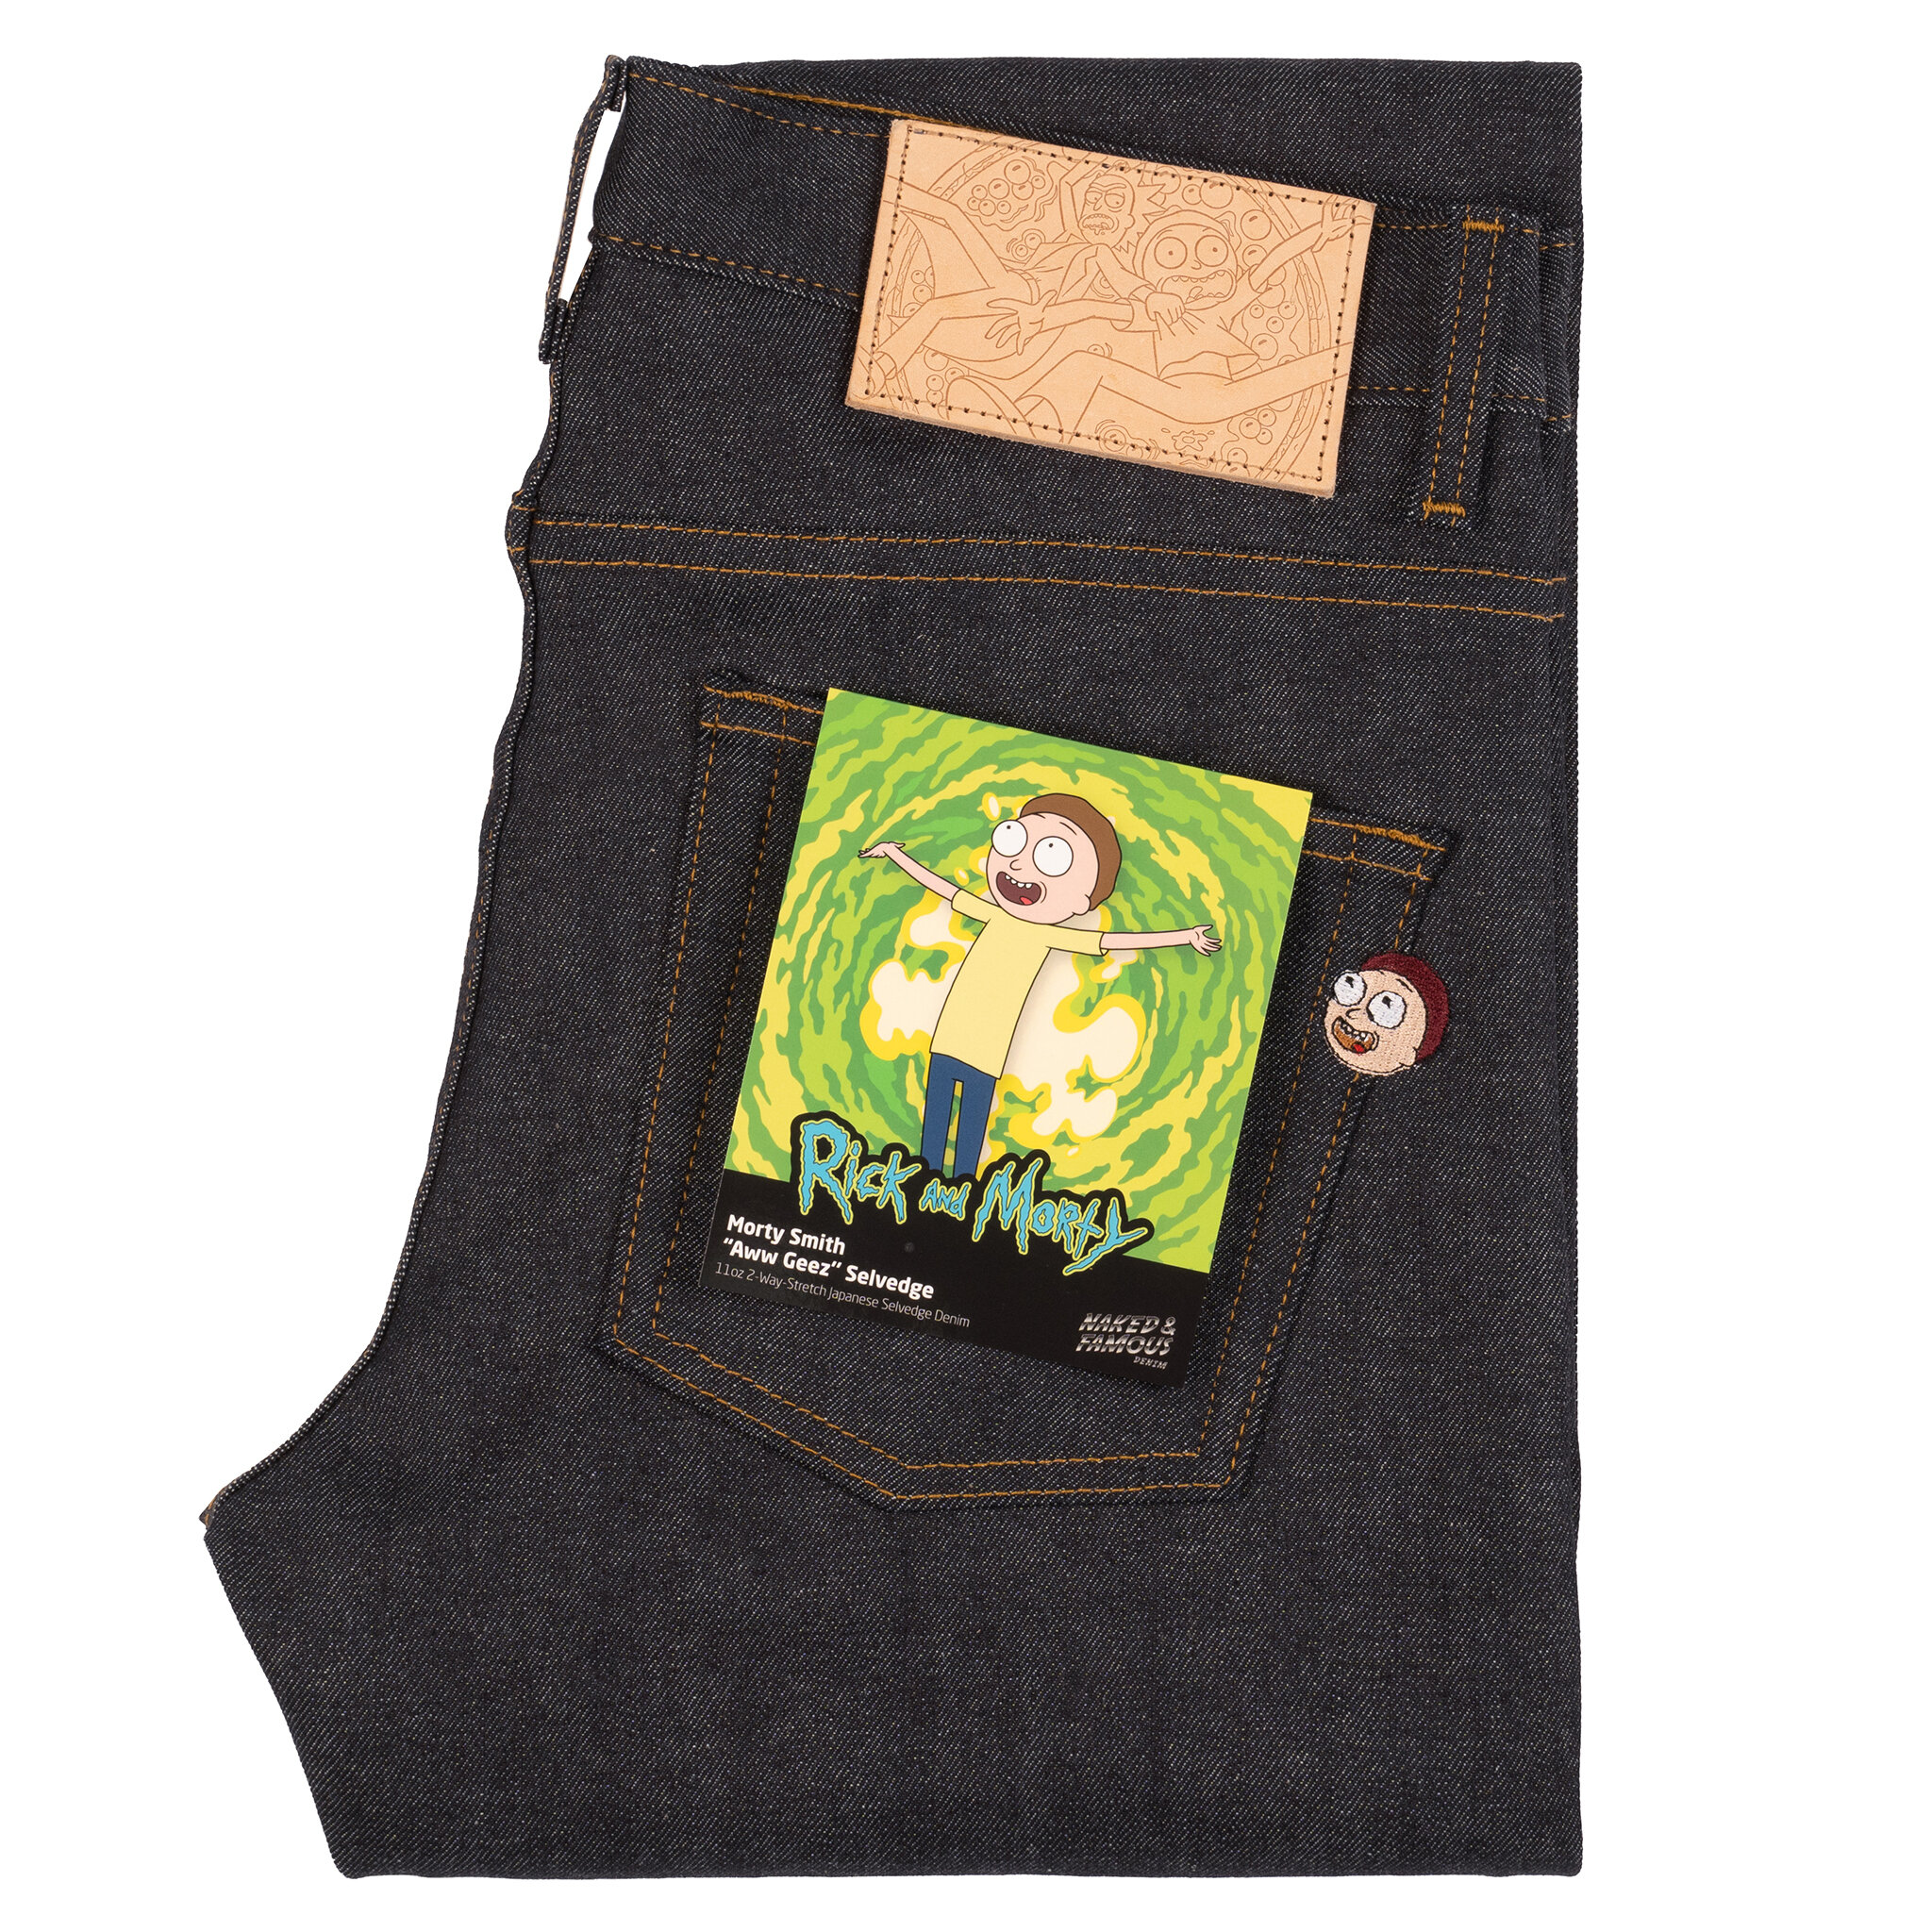  Morty Smith “Aww Geez” Selvedge jeans - folded 